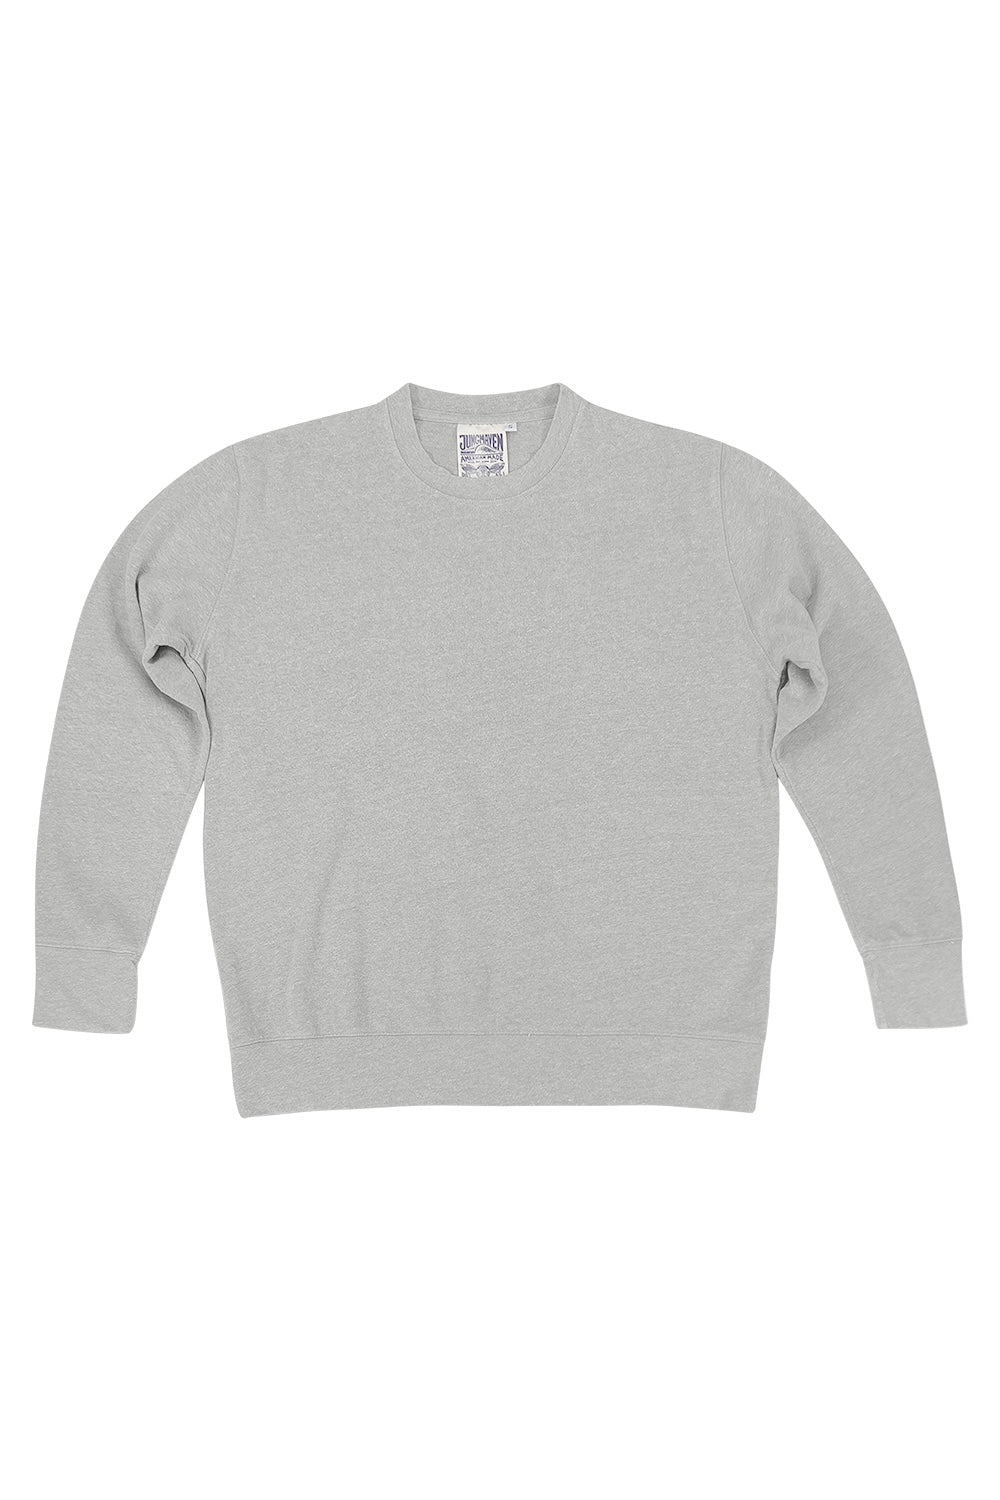 California Pullover | Jungmaven Hemp Clothing & Accessories / Color: Athletic Gray